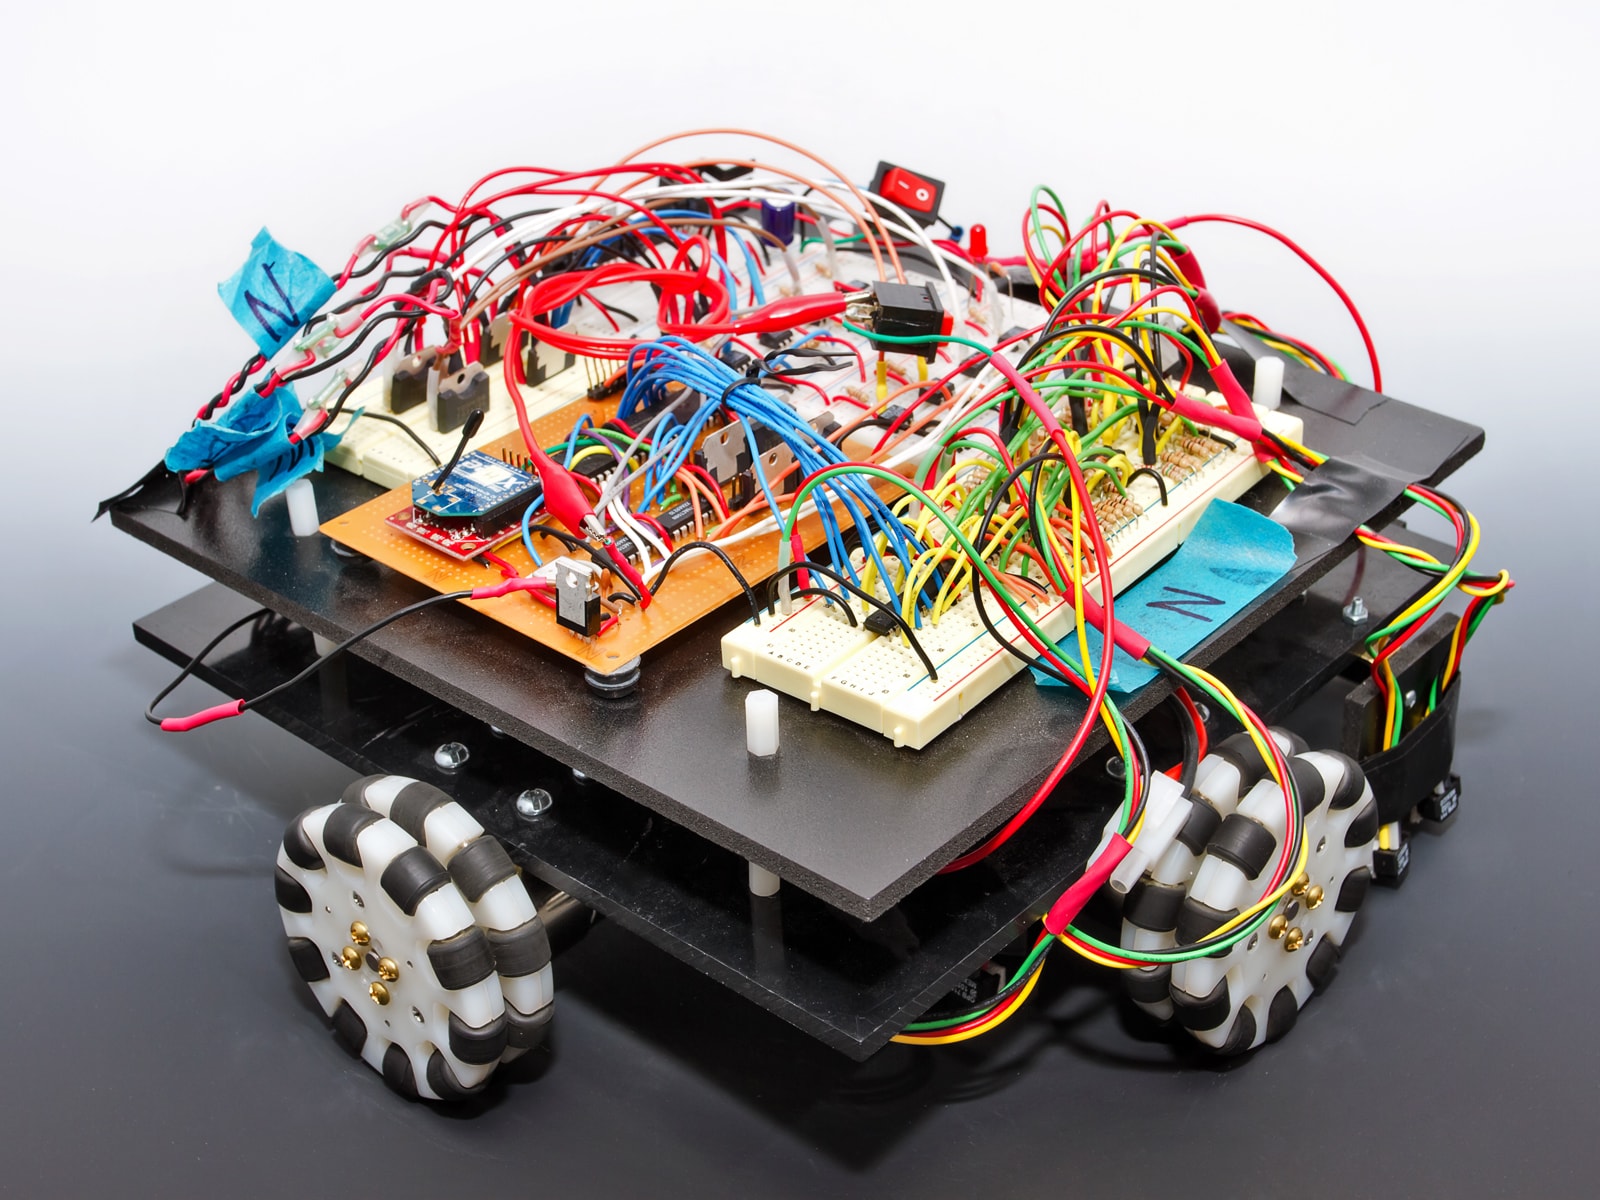 A Square Robot With Exposed Circuitry And Black And - Computer Electrical Engineering Project - HD Wallpaper 